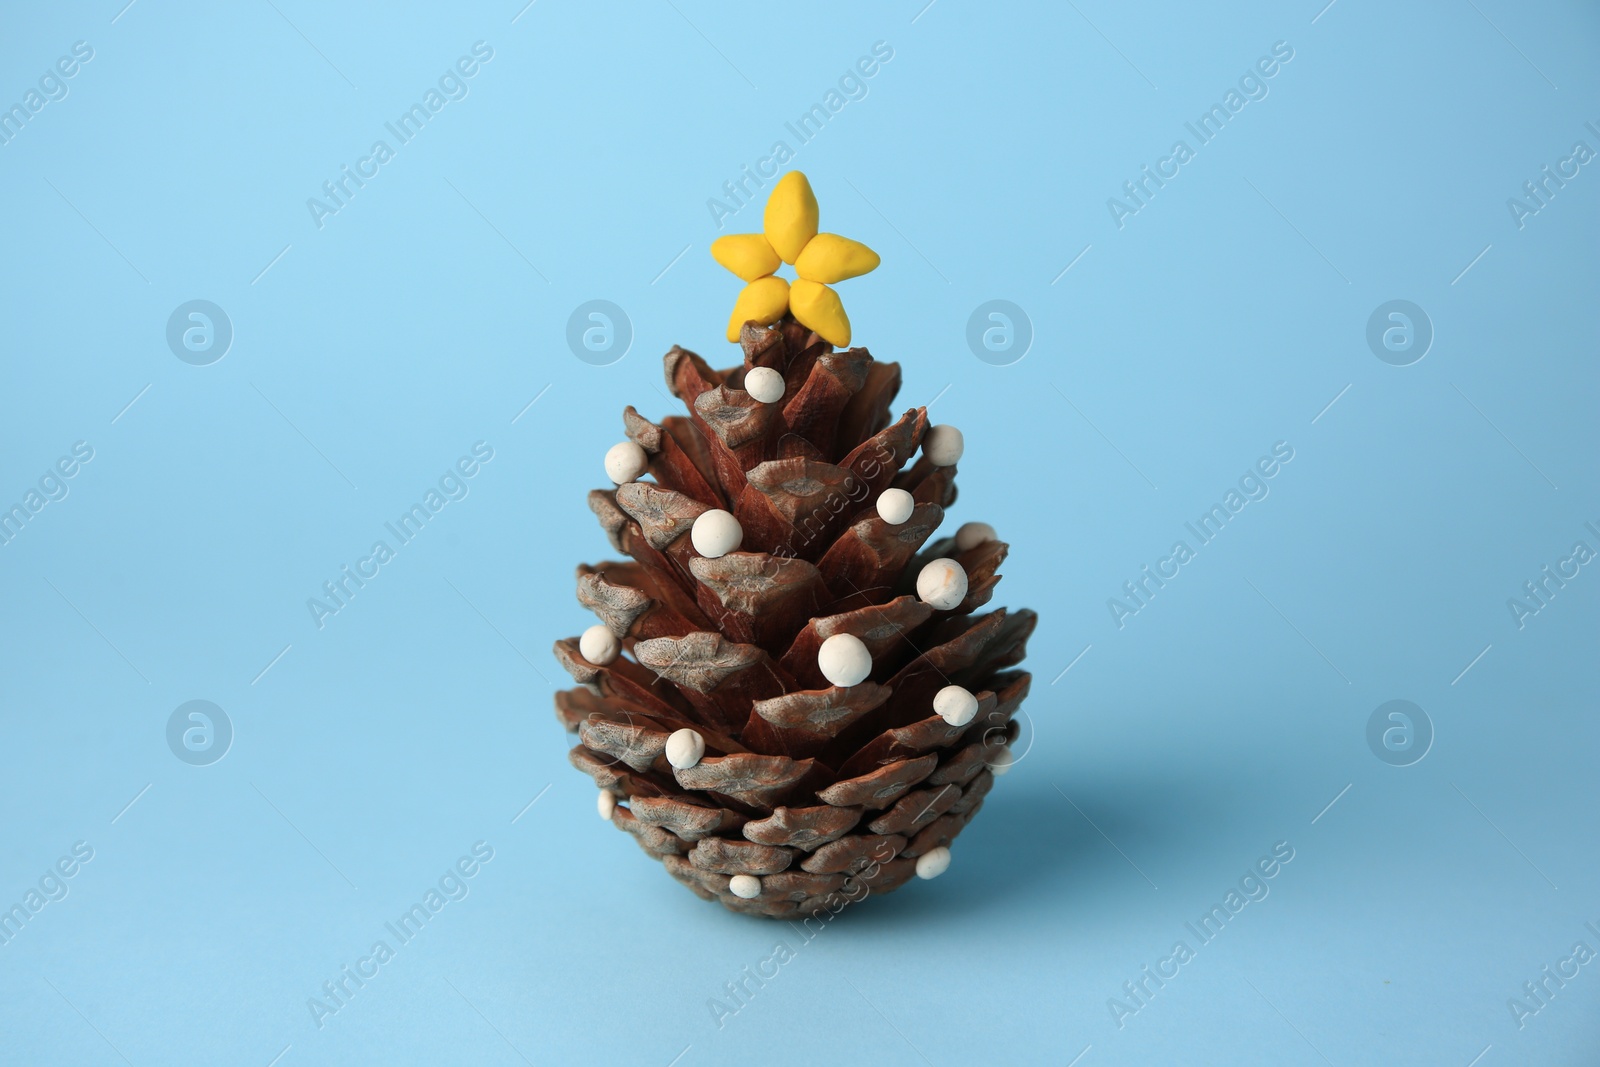 Photo of Christmas tree made from pine cone and plasticine on light blue background. Children's handmade ideas